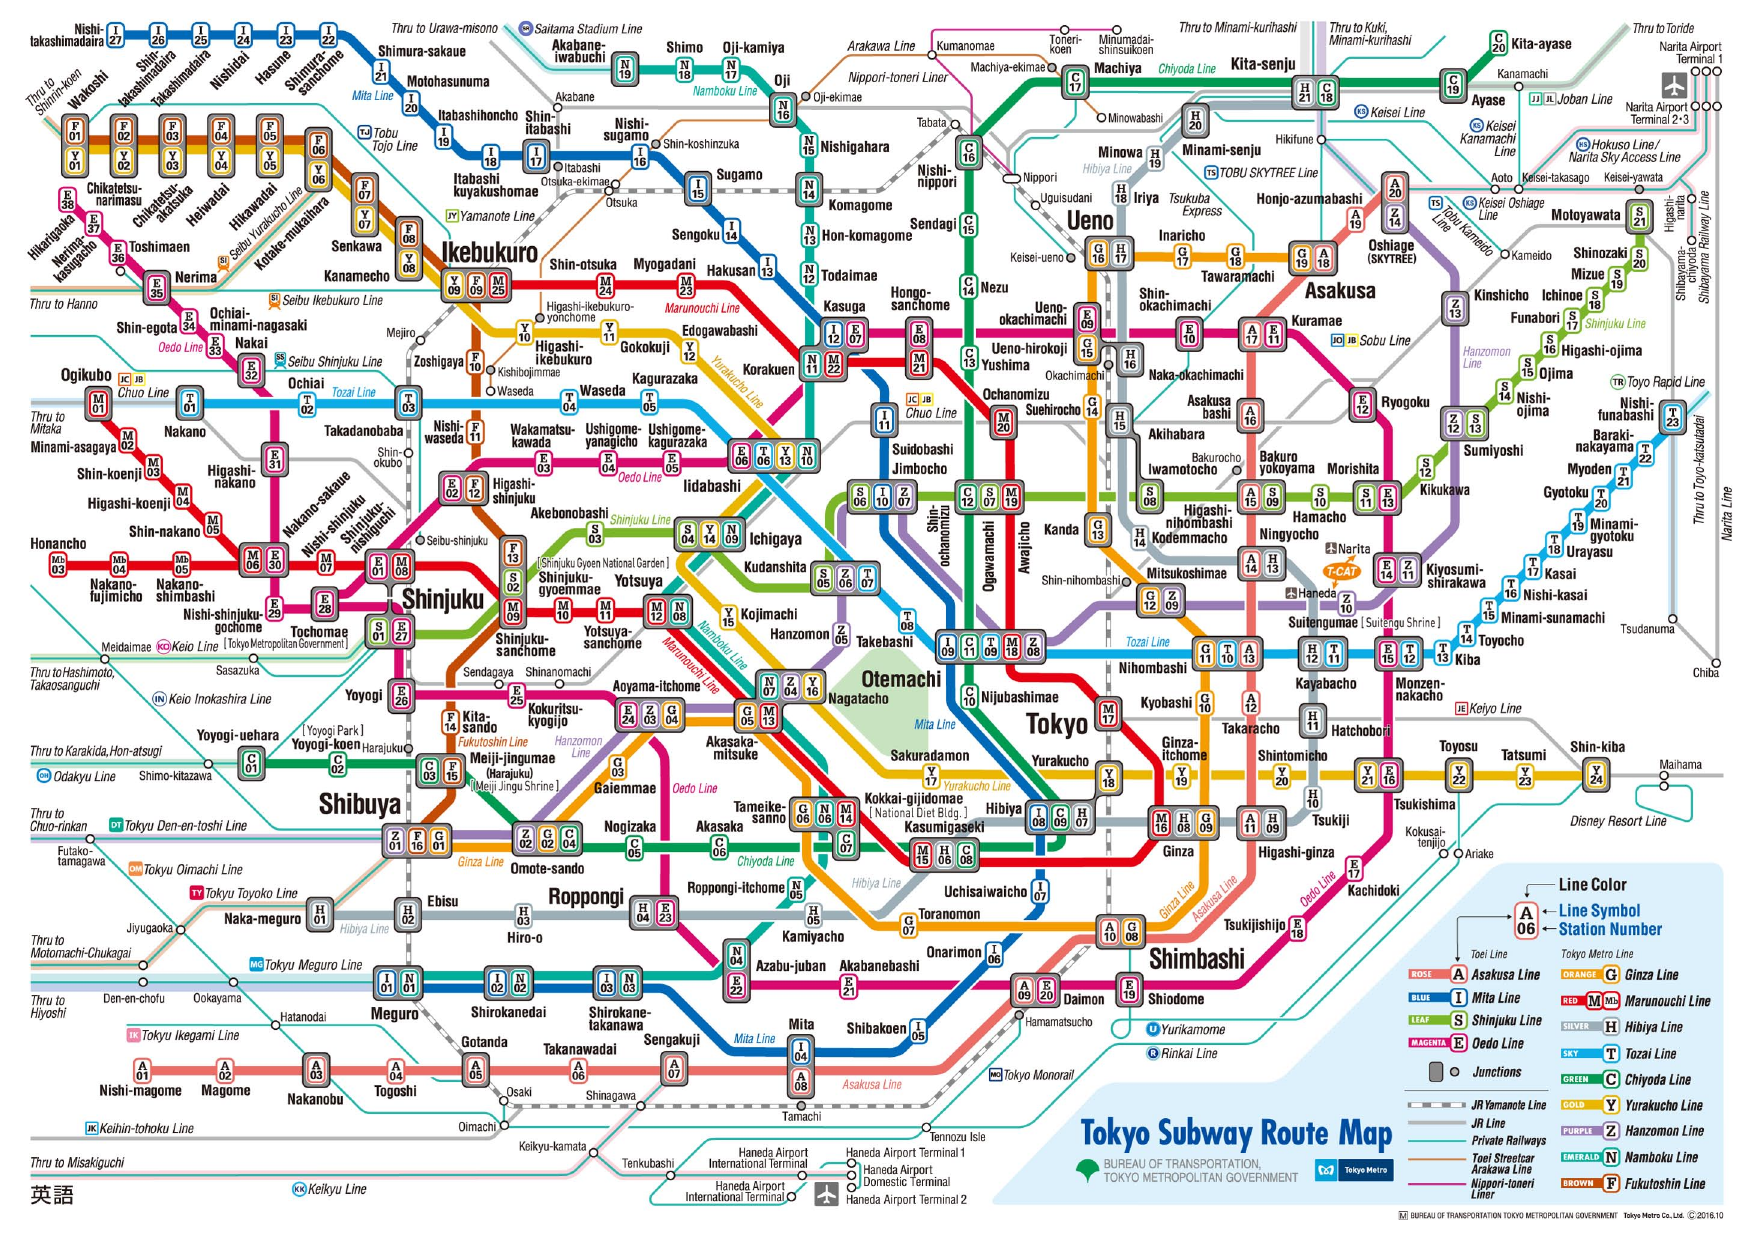 the Tokyo subway map (complex)